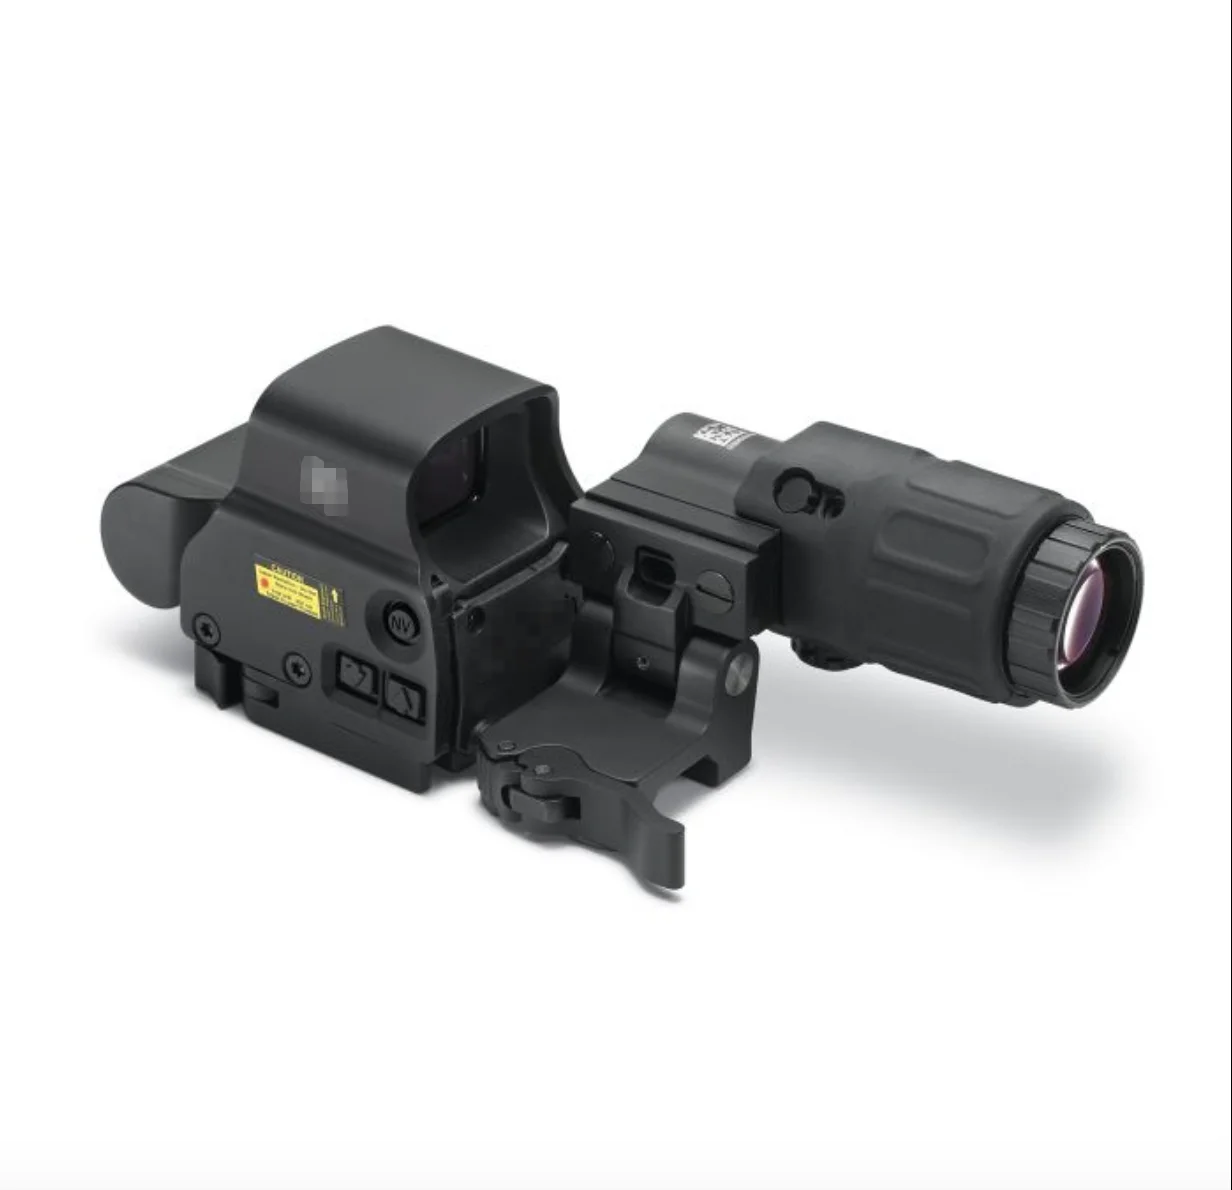 

558 Holographic Sight with G33 Highest Quality Magnifying Glass Quick Release Rollover Multiplier Lifting Range red dot sight